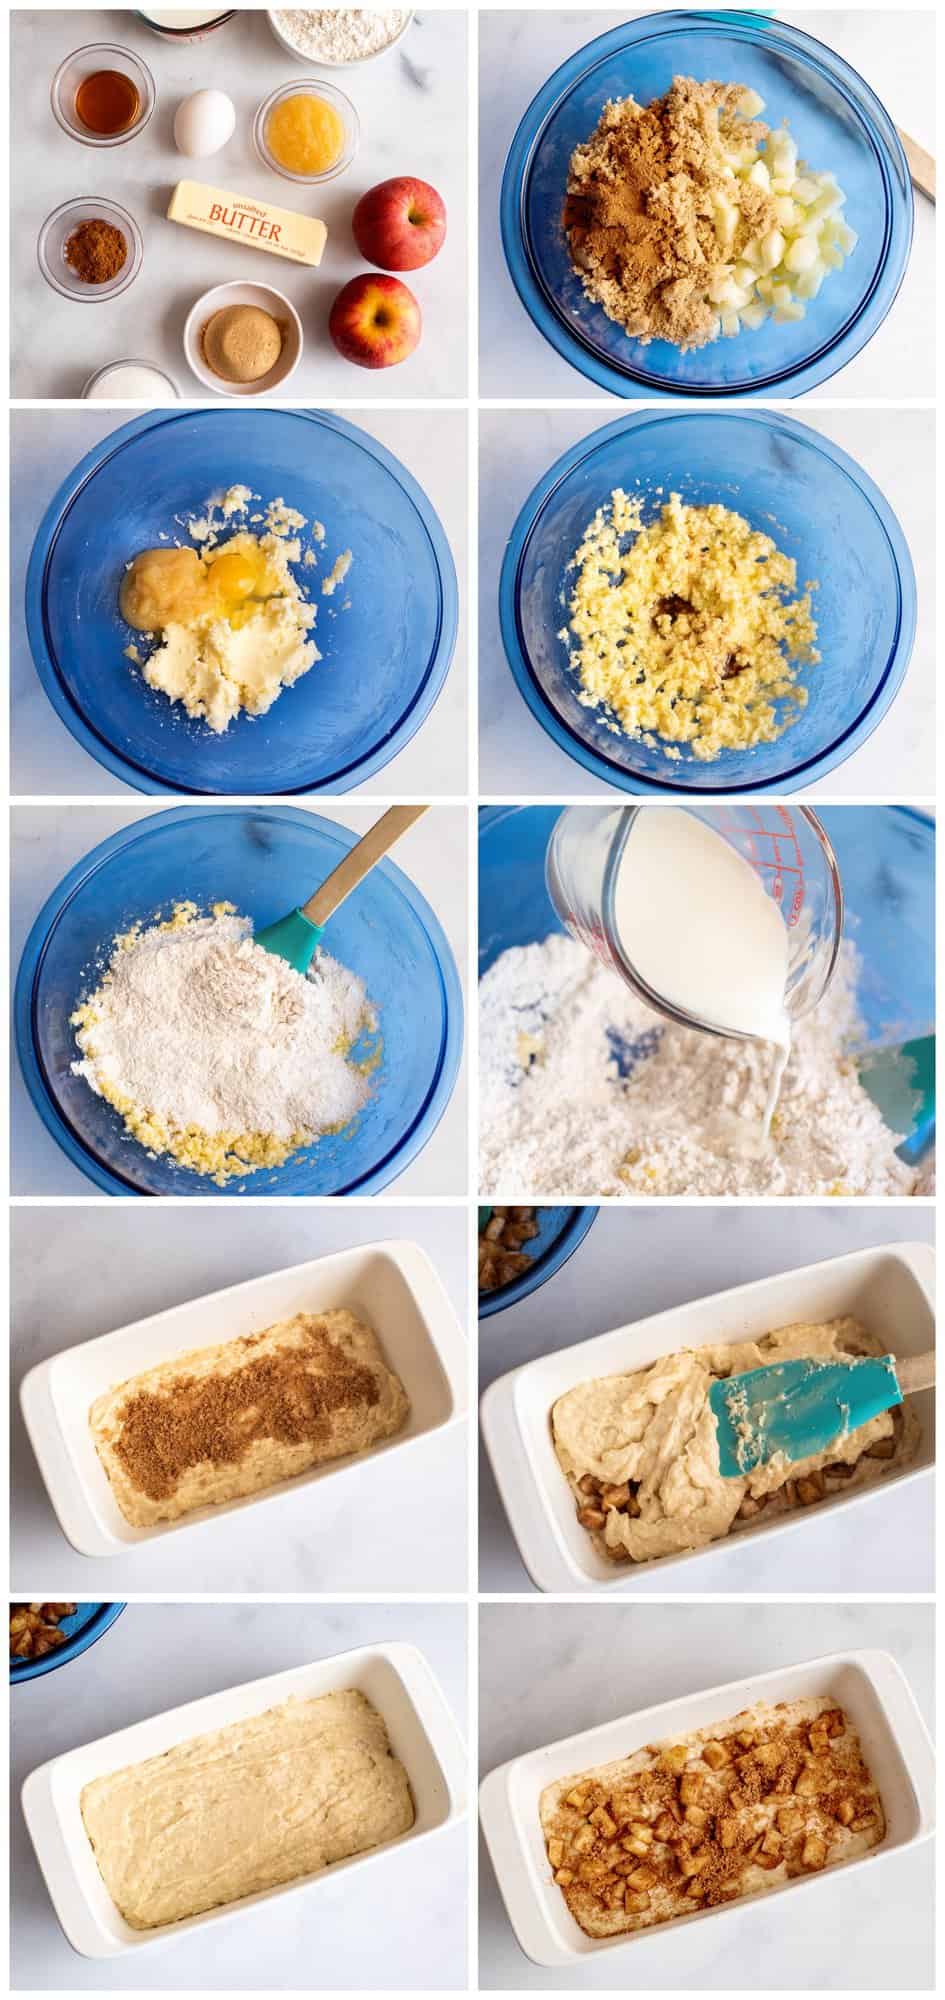 step by step photos showing how to make apple cinnamon bread